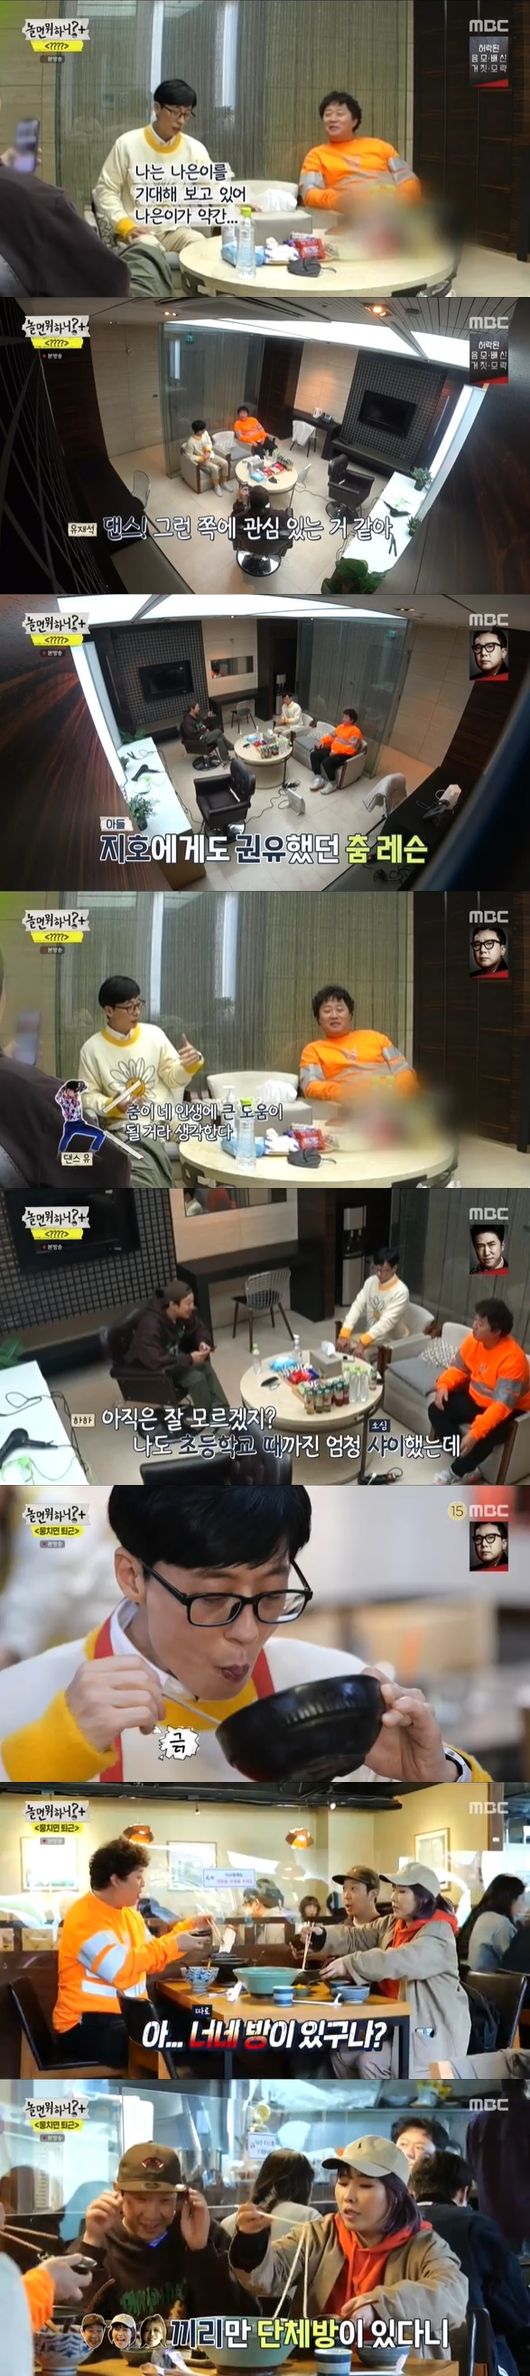 Hangout with Yoo members are getting closer to Off work feature.MBC entertainment Hangout with Yoo + broadcast on the afternoon of the 6th, Yoo Jae-Suk, Jin Jun-ha, Haha, Shin Bong-sun, Americas Unified Off Work feature was released.Im looking forward to my daughter Na-eun, who seems a little bit interested in that dance side, Yoo Jae-Suk said.Yoo Jae-Suk said: Unexpectedly, there are many people who are unfamiliar with entertainers.Bongseon is unfamiliar, and the Americas are very unfamiliar. Jeong Jun-ha said, I often contact Bongseon, but the Americas do not know the contact information yet.My wife confessed, Do not make it uncomfortable in the Americas.At this time, Shin Bong-sun and the Americas arrived in the waiting room, and Jin Jun-ha showed unusually taking care of the food.Rather, the Americas gave a snack to Jeong Jun-ha, saying, Please eat this one, but declined, No, no, no, no, no, no, no, because of me.Yoo Jae-Suk, who watched this carefully, laughed at Jeong Jun-ha, who gave over-kindness, saying, I give you a child and you can eat it when you do.On this day, members were given a Off work mission.Suddenly during a given days time, the members Choices one of the three Choices and all of them work Off.The first mission was to set a breakfast menu, and each departed and Choices the rice bowl, the in-savoury restaurant, and the full course.Yoo Jae-Suk headed for a rice bowl, Jeong Jun-ha Haha Shin Bong-sun for Insa restaurant, and the Americas for full course.Jeong Jun-ha said: I actually avoided it deliberately because I didnt want to stick together with Park Jae-Seok, Park Jae-Seok is unconditional rice soup.So I came here, and Haha also avoided the rice bowl house in anticipation of the Choices of Yoo Jae-Suk.Haha, who was eating, asked, Why did the beauty suddenly upload a selfie to Katok? And Jeong Jun-ha said, Oh, you have four rooms.Turns out there was Haha, Shin Bong-sun, and the Americas only Katok group room. Shin Bong-sun explained, I made it because my brother sent me a gulbi, and Jeong Jun-ha said, I received a gulbi, but I do not have a room.Haha said, I will invite you.The second was a mission to spend 200,000 won in an hour at the shopping mall, and a message that five people could buy off the same space.Yoo Jae-Suk called junior Jo Se-ho in the taxi and asked him to just give Hosaya 200,000 won.But Jo Se-ho said: My brother has no OTP card, I can give it to you right away in cash if youre next to me, but now the cell phone is not working, but the password setting is not working.I do not think other friends will be a little quick. Yoo Jae-Suk then called the attached doll Lee Kwang-soo and said, Give me 200,000 won.Lee Kwang-soo said, That last month, I was stamped on my bankbook at zero won, the first time in 10 years.Yoo Jae-Suk asked, So you can not pay 200,000 won? Lee Kwang-soo replied, Its 0 won, brother, Im really 0 won.Yoo Jae-Suk laughed, These are really, you guys are really not going to do it. Its too much.Yoo Jae-Suk bought his own things at the shopping mall and said, We should buy a tableware by Na-eun. It is different from spoons and forks.Yoo Jae-Suk, who finished shopping pleasantly, liked it, saying, I feel like this because I shop.The third is to do shoes massage shop, PC room, and Choices among Han River View cafe.Yoo Jae-Suk and Shin Bong-sun went to a massage shop, Jeong Jun-ha and the Americas went to a cafe, and Haha went to a PC room.I used to go to a foot massage shop in the middle of filming Happy Together before, so I thought you might come, Shin Bong-sun said.Yoo Jae-Suk said, When I was two, I said that I was awkward or there was no such person, but I showed a disagreement, and Shin Bong-sun laughed.There was a static between the two people who received the massage, and Yoo Jae-Suk said, Bon Sun, you are 80, and you are one year older than Kyung Eun.Shin Bong-sun said, Youve talked about it before, its creepy to talk like it was the first time.Yoo Jae-Suk called Haha and the Americas, and Shin Bong-sun asked, Im next to you and you keep calling someone else and am I that uncomfortable?Yoo Jae-Suk said, If you say the word inconvenience once more in your mouth, you will not stay still.At the end, five members gathered at the photo studio to succeed in the mission and work off.In the photo shop, photos of the members of the Infinite Challenge were kept in the past, and Haha added, We have to leave a picture because we are family.What do you do when you play screen captures